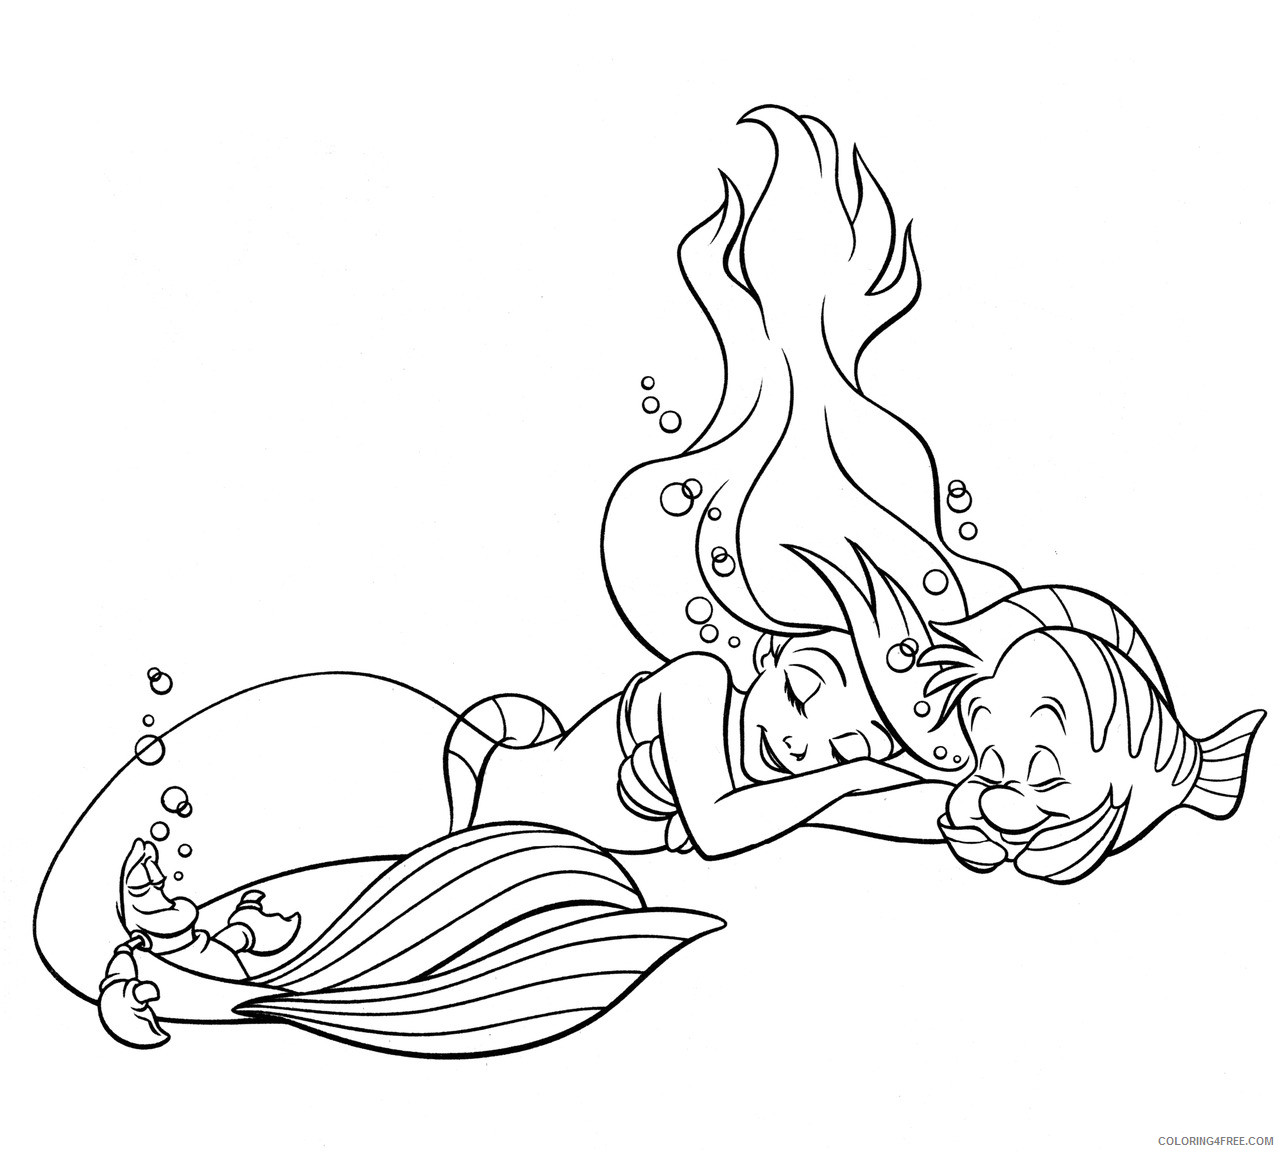 Ariel the Little Mermaid Coloring Pages Cartoons Princess Ariel Printable 2020 0603 Coloring4free